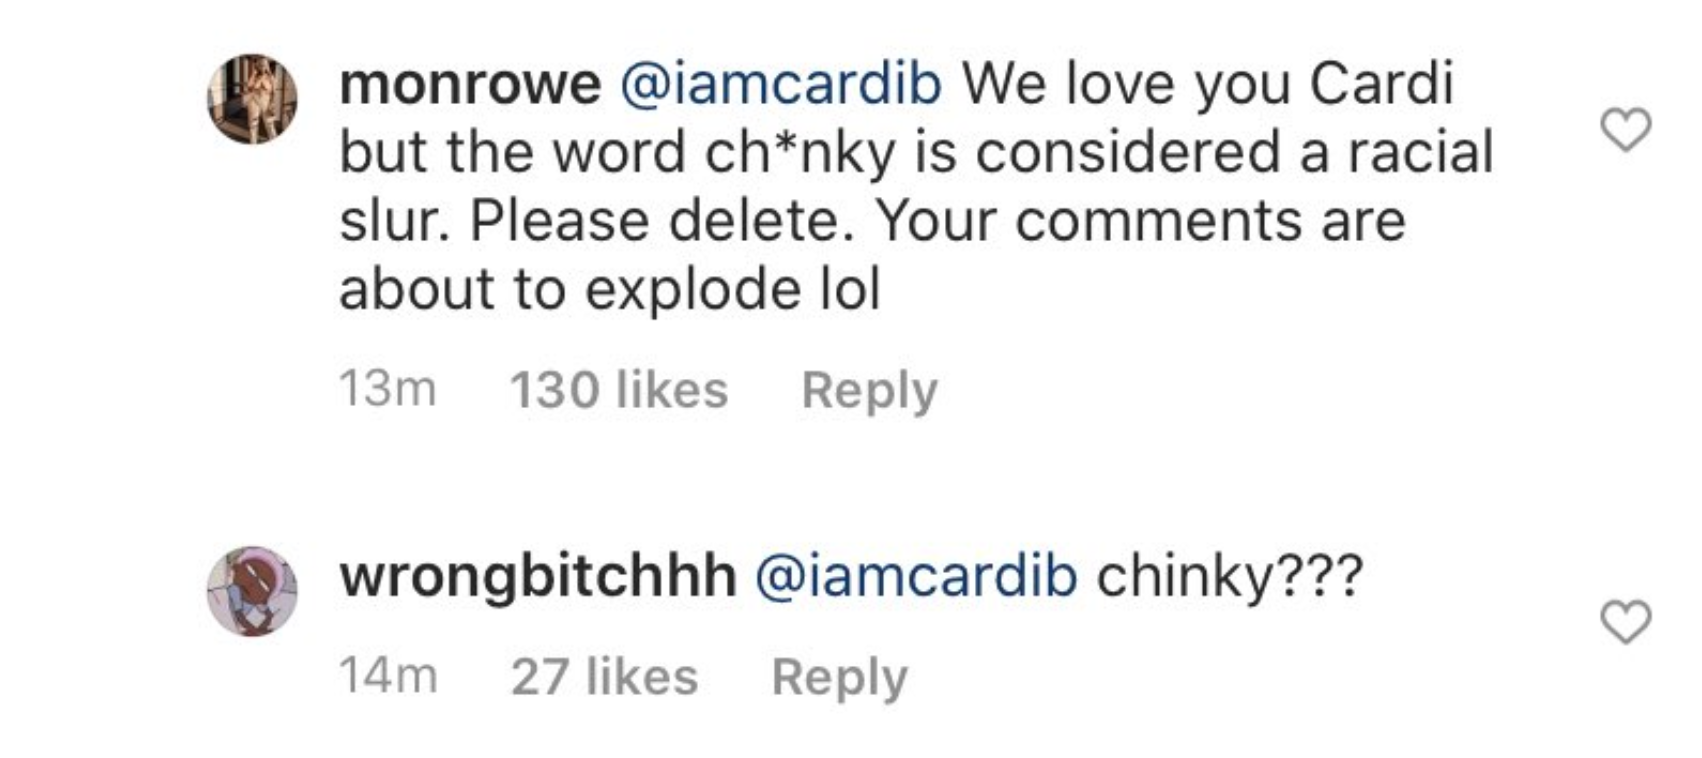 A fan writes, &quot;We love you Cardi but the word ch*nky is considered a racial slur. Please delete.&quot;